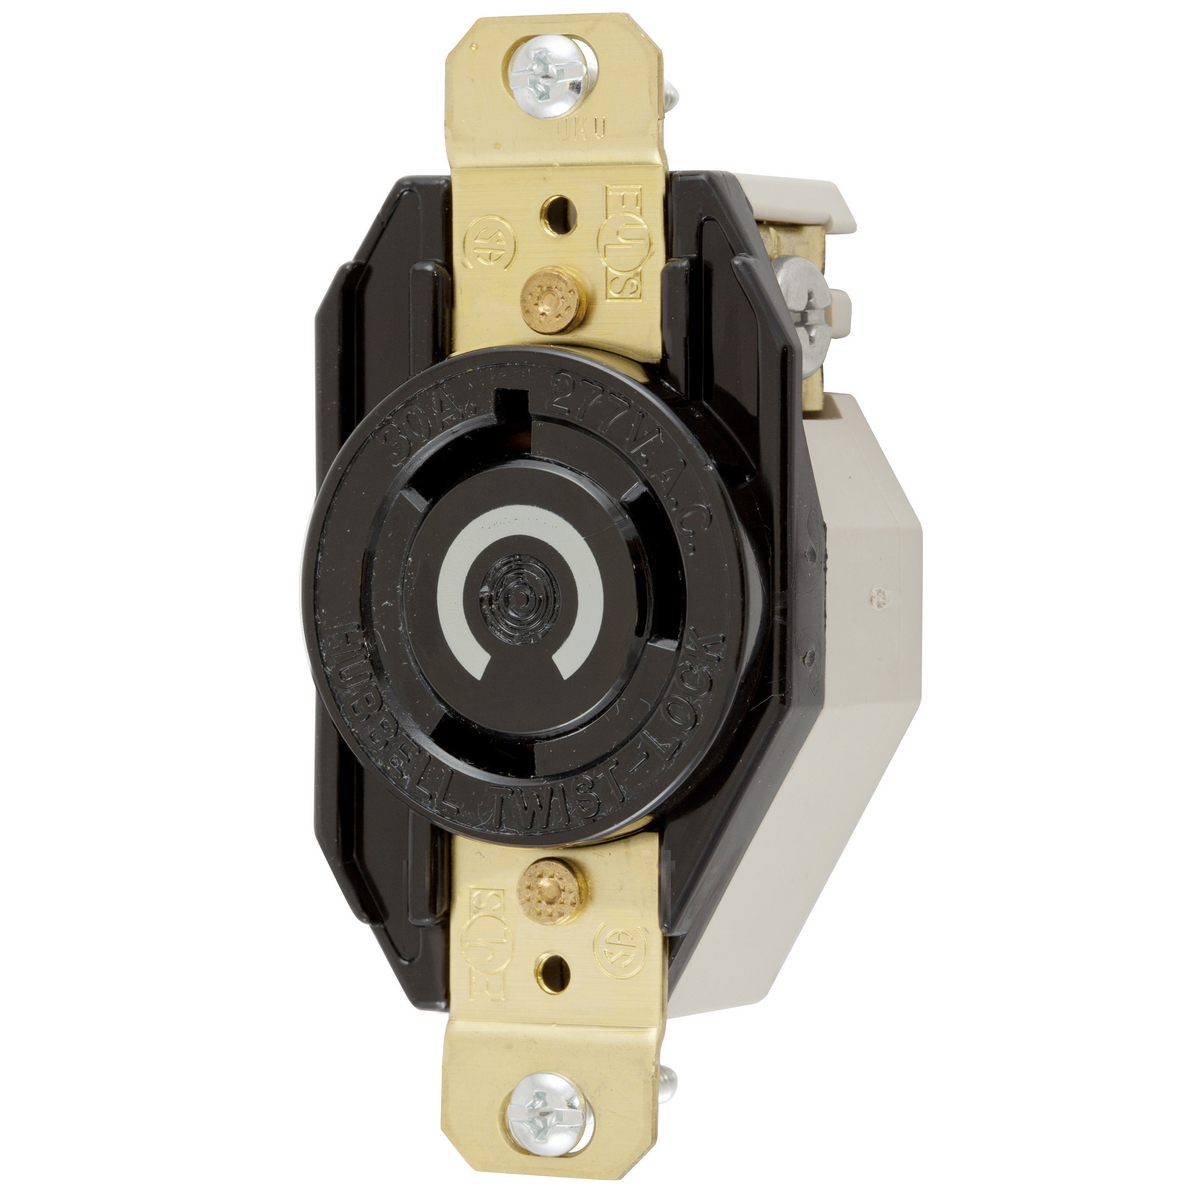 Hubbell Twist-Lock Receptacle 30A 277V 